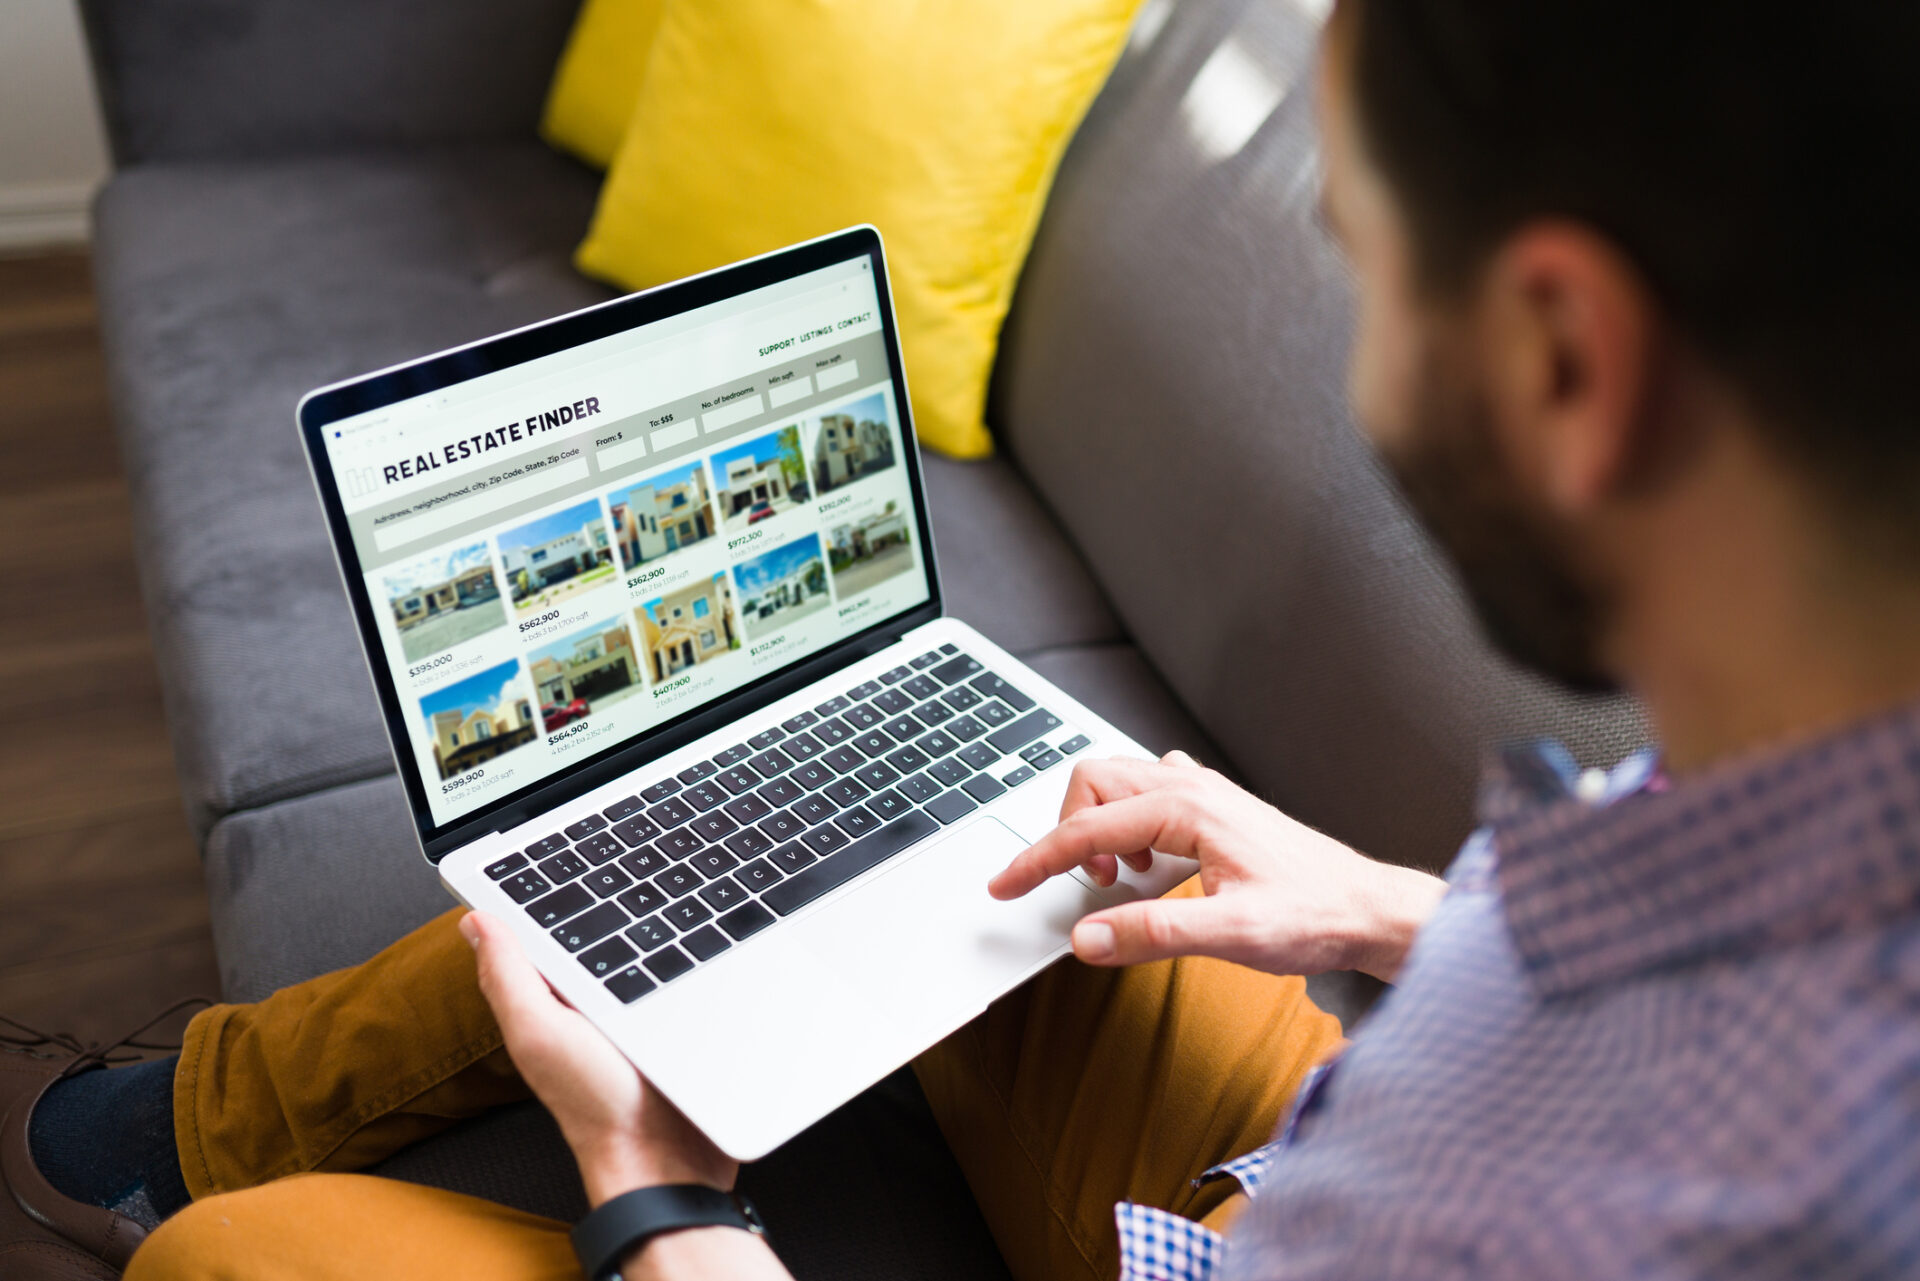 Consumer searching real estate website